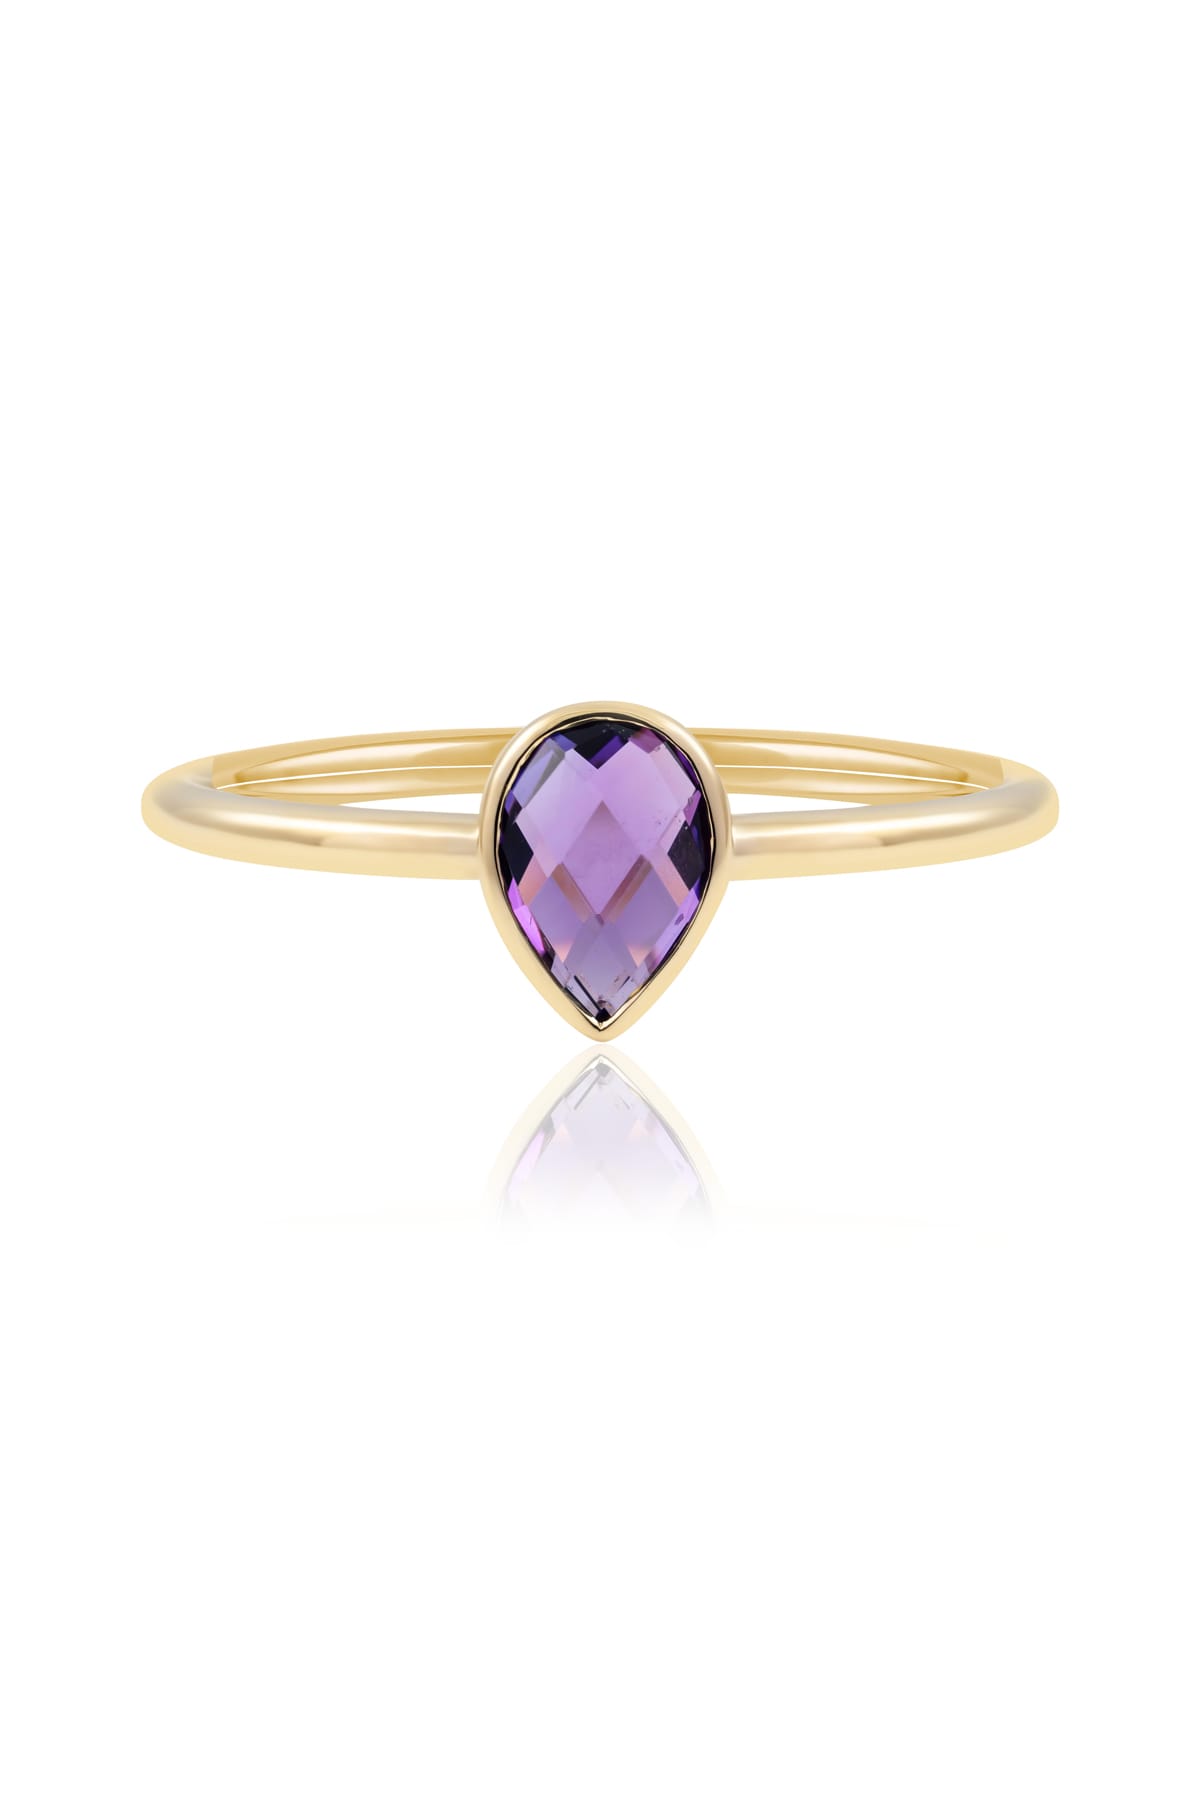 0.70ct Pear Cut Bezel Set Amethyst Solitaire Ring from LeGassick.